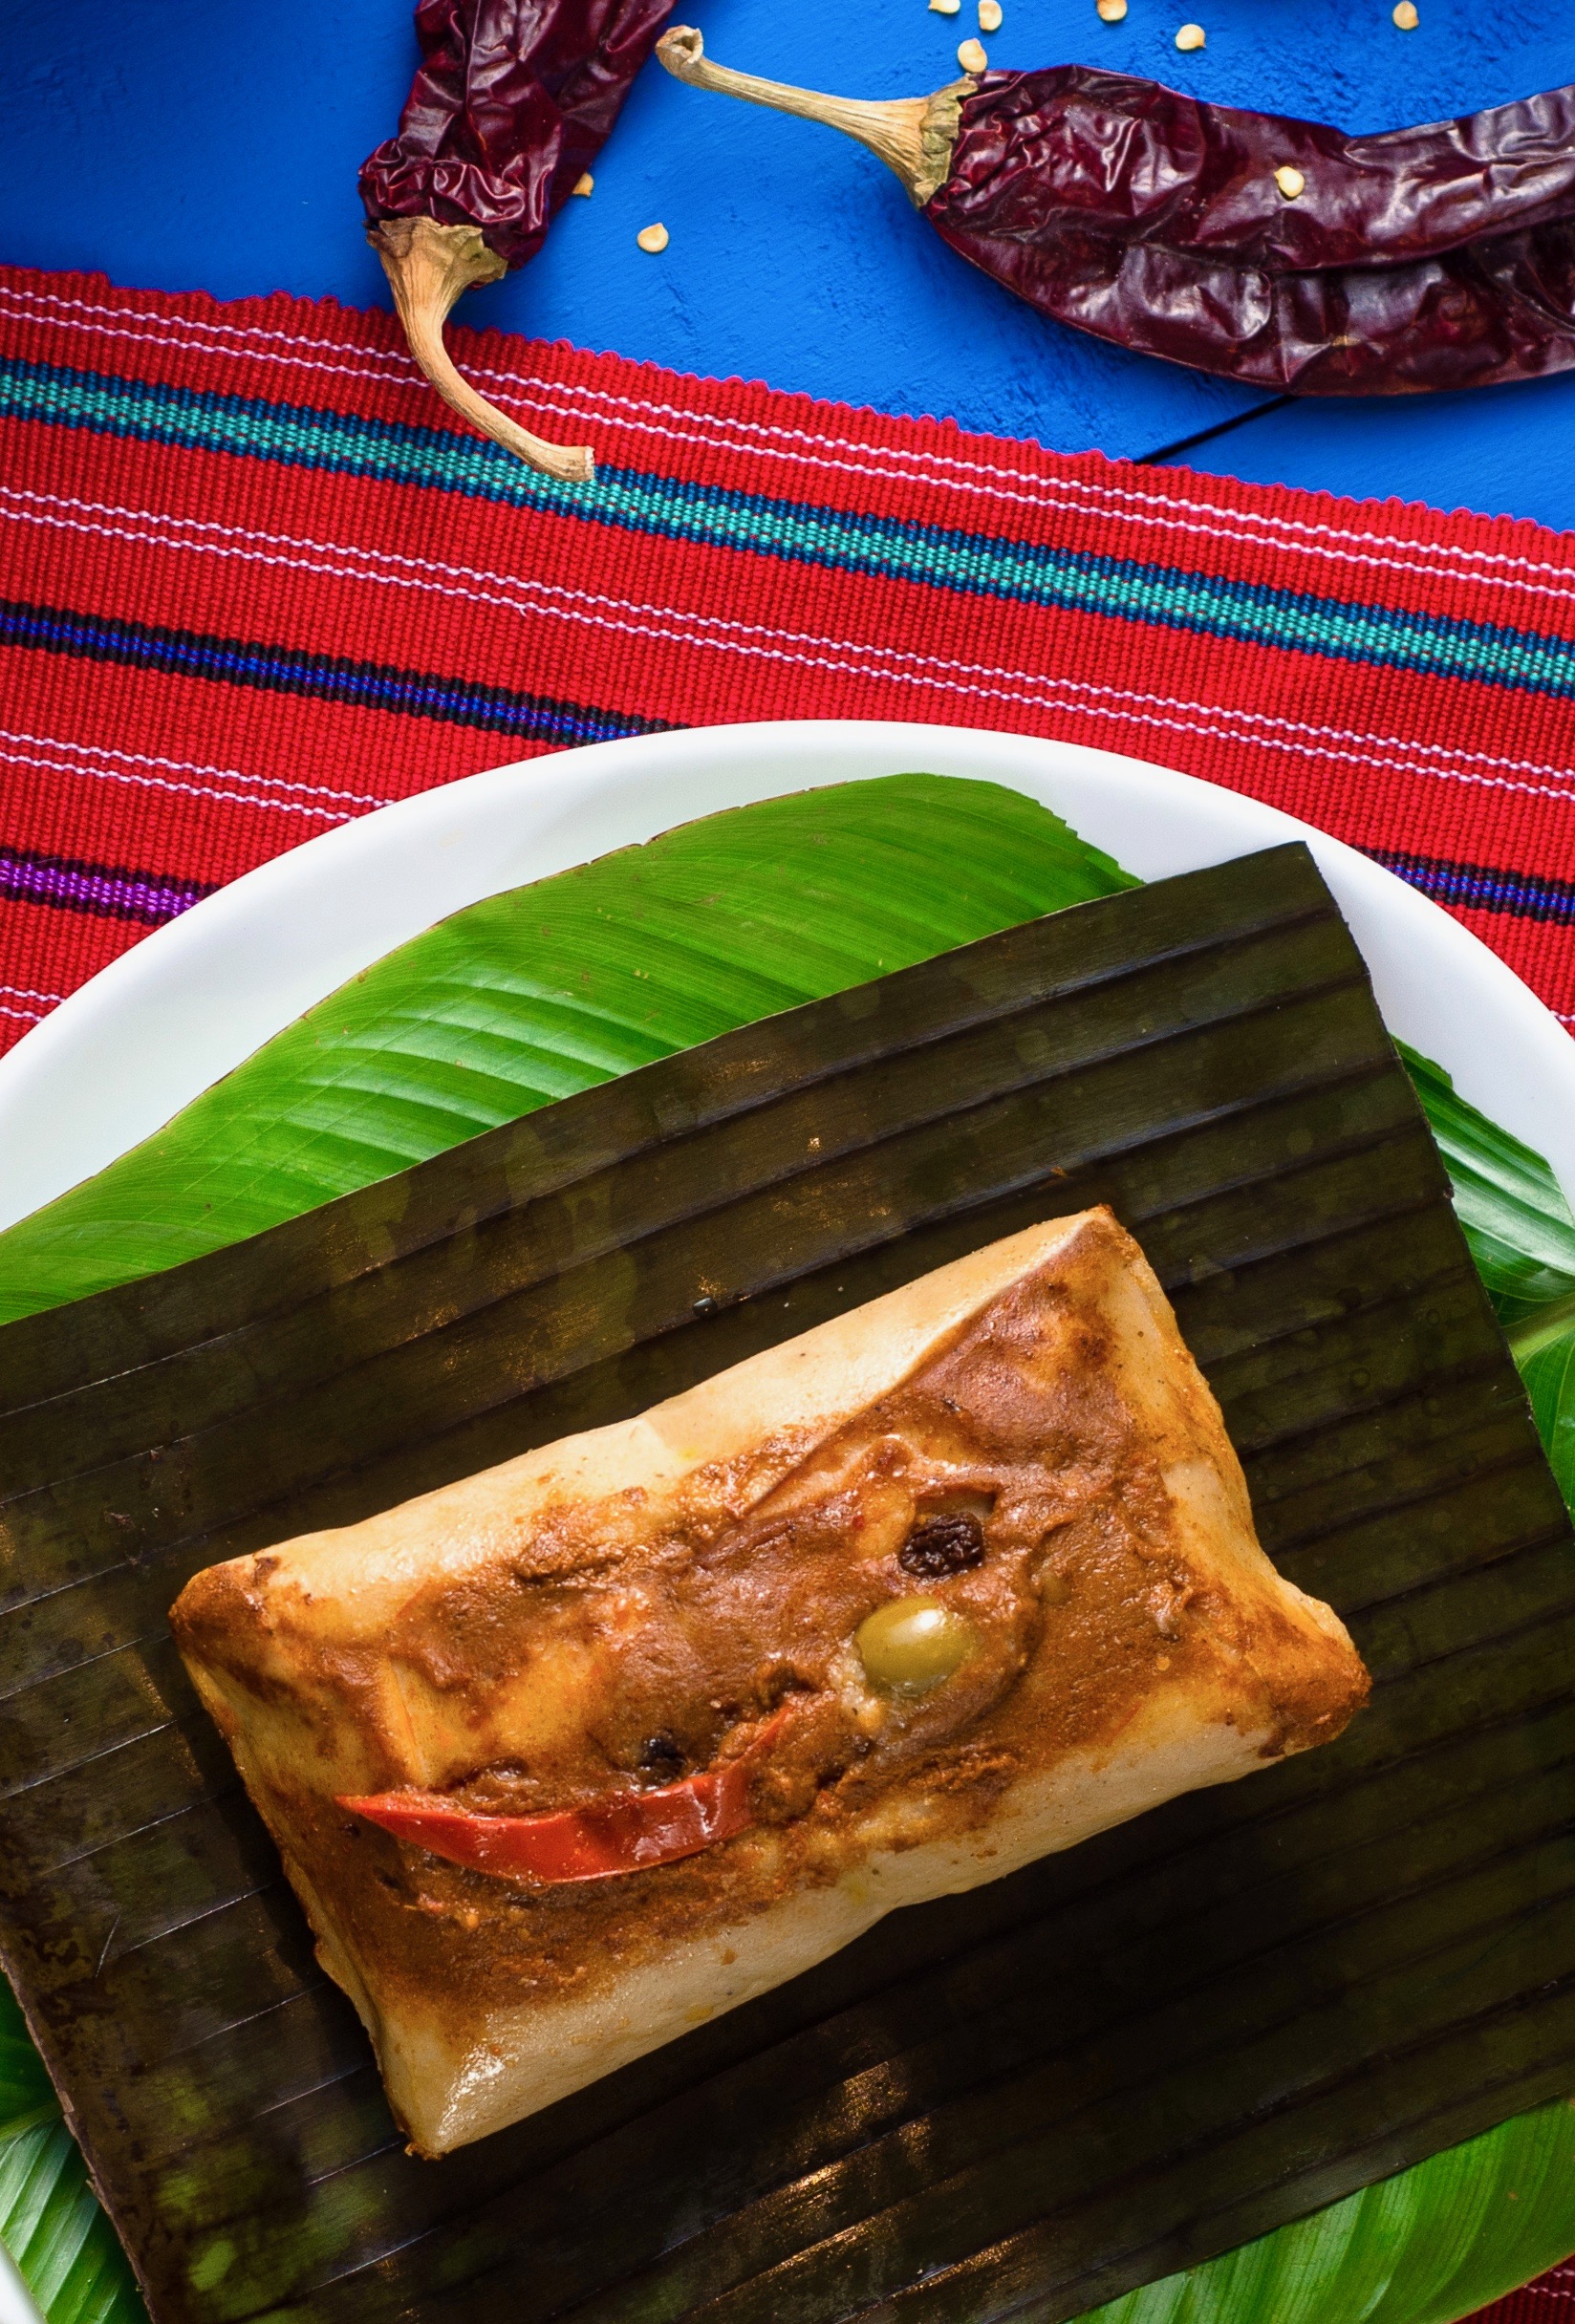 the best guatemalan tamales colorados, a traditonal dish for Christmas and saturdays